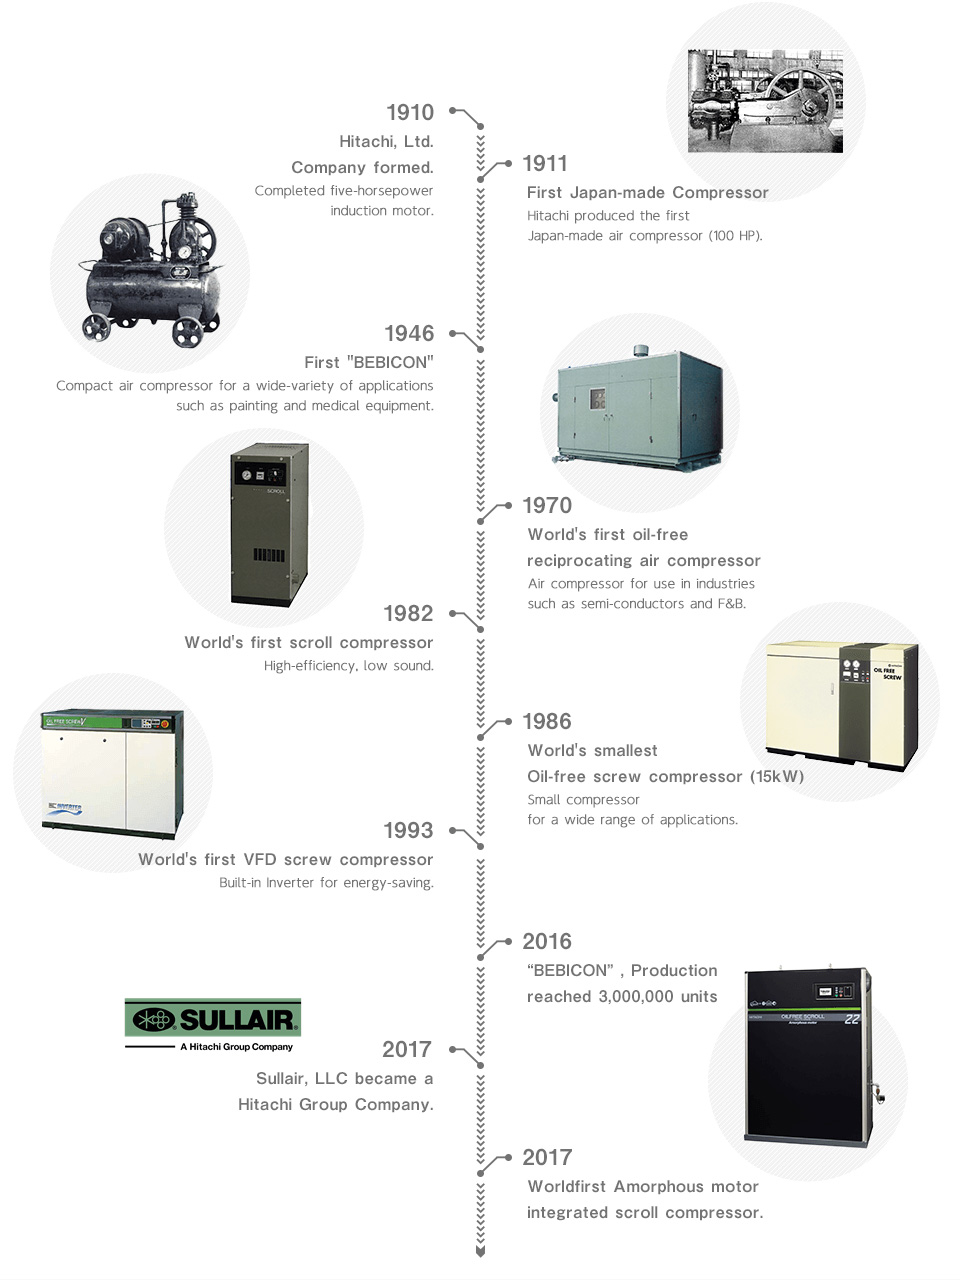 Hitachi Compressor History. The first ever Japan-made air compressor in 1911